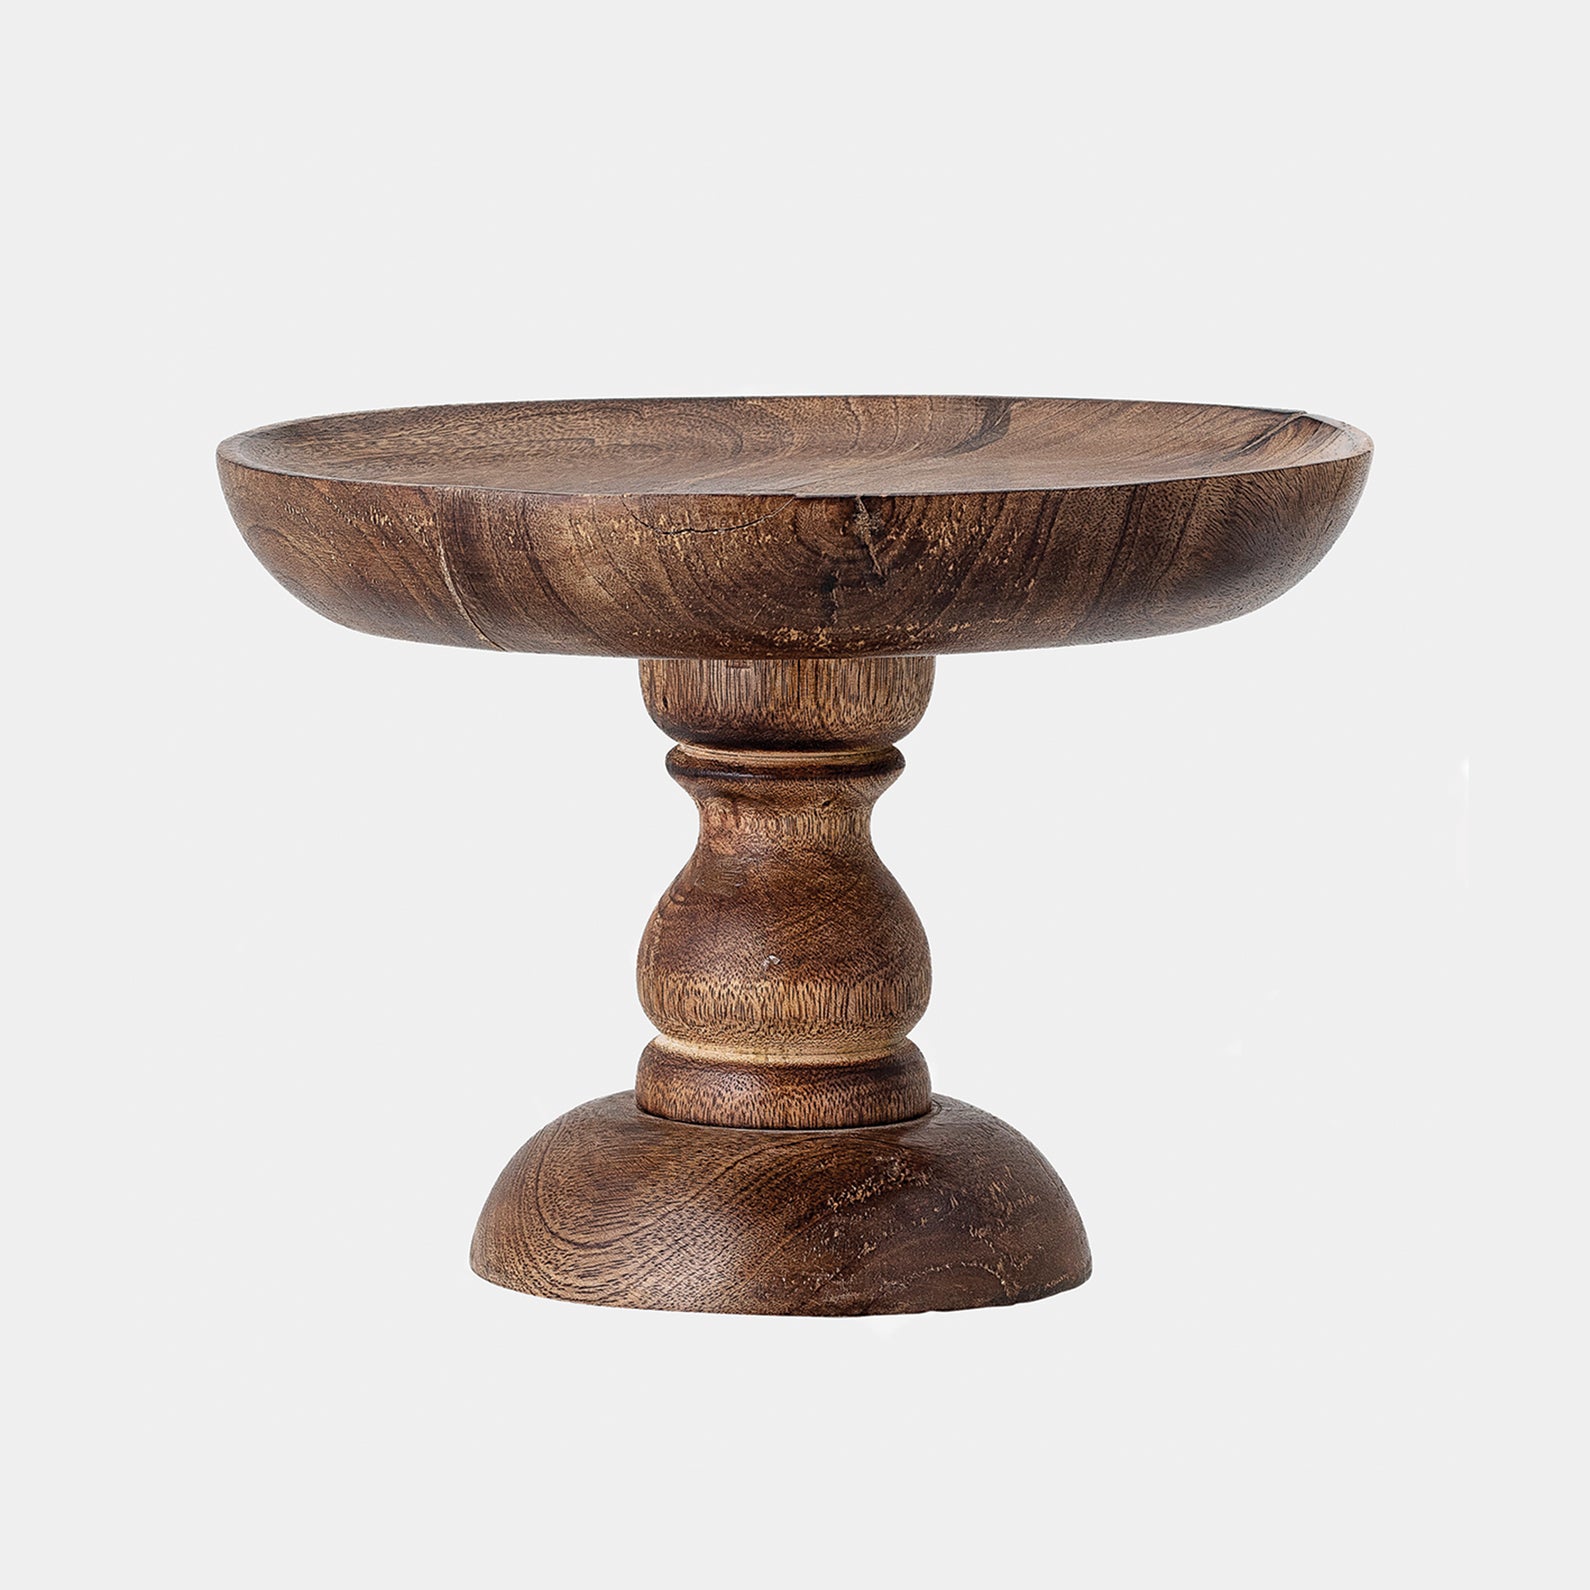 HENLEY WOODEN CAKE STAND